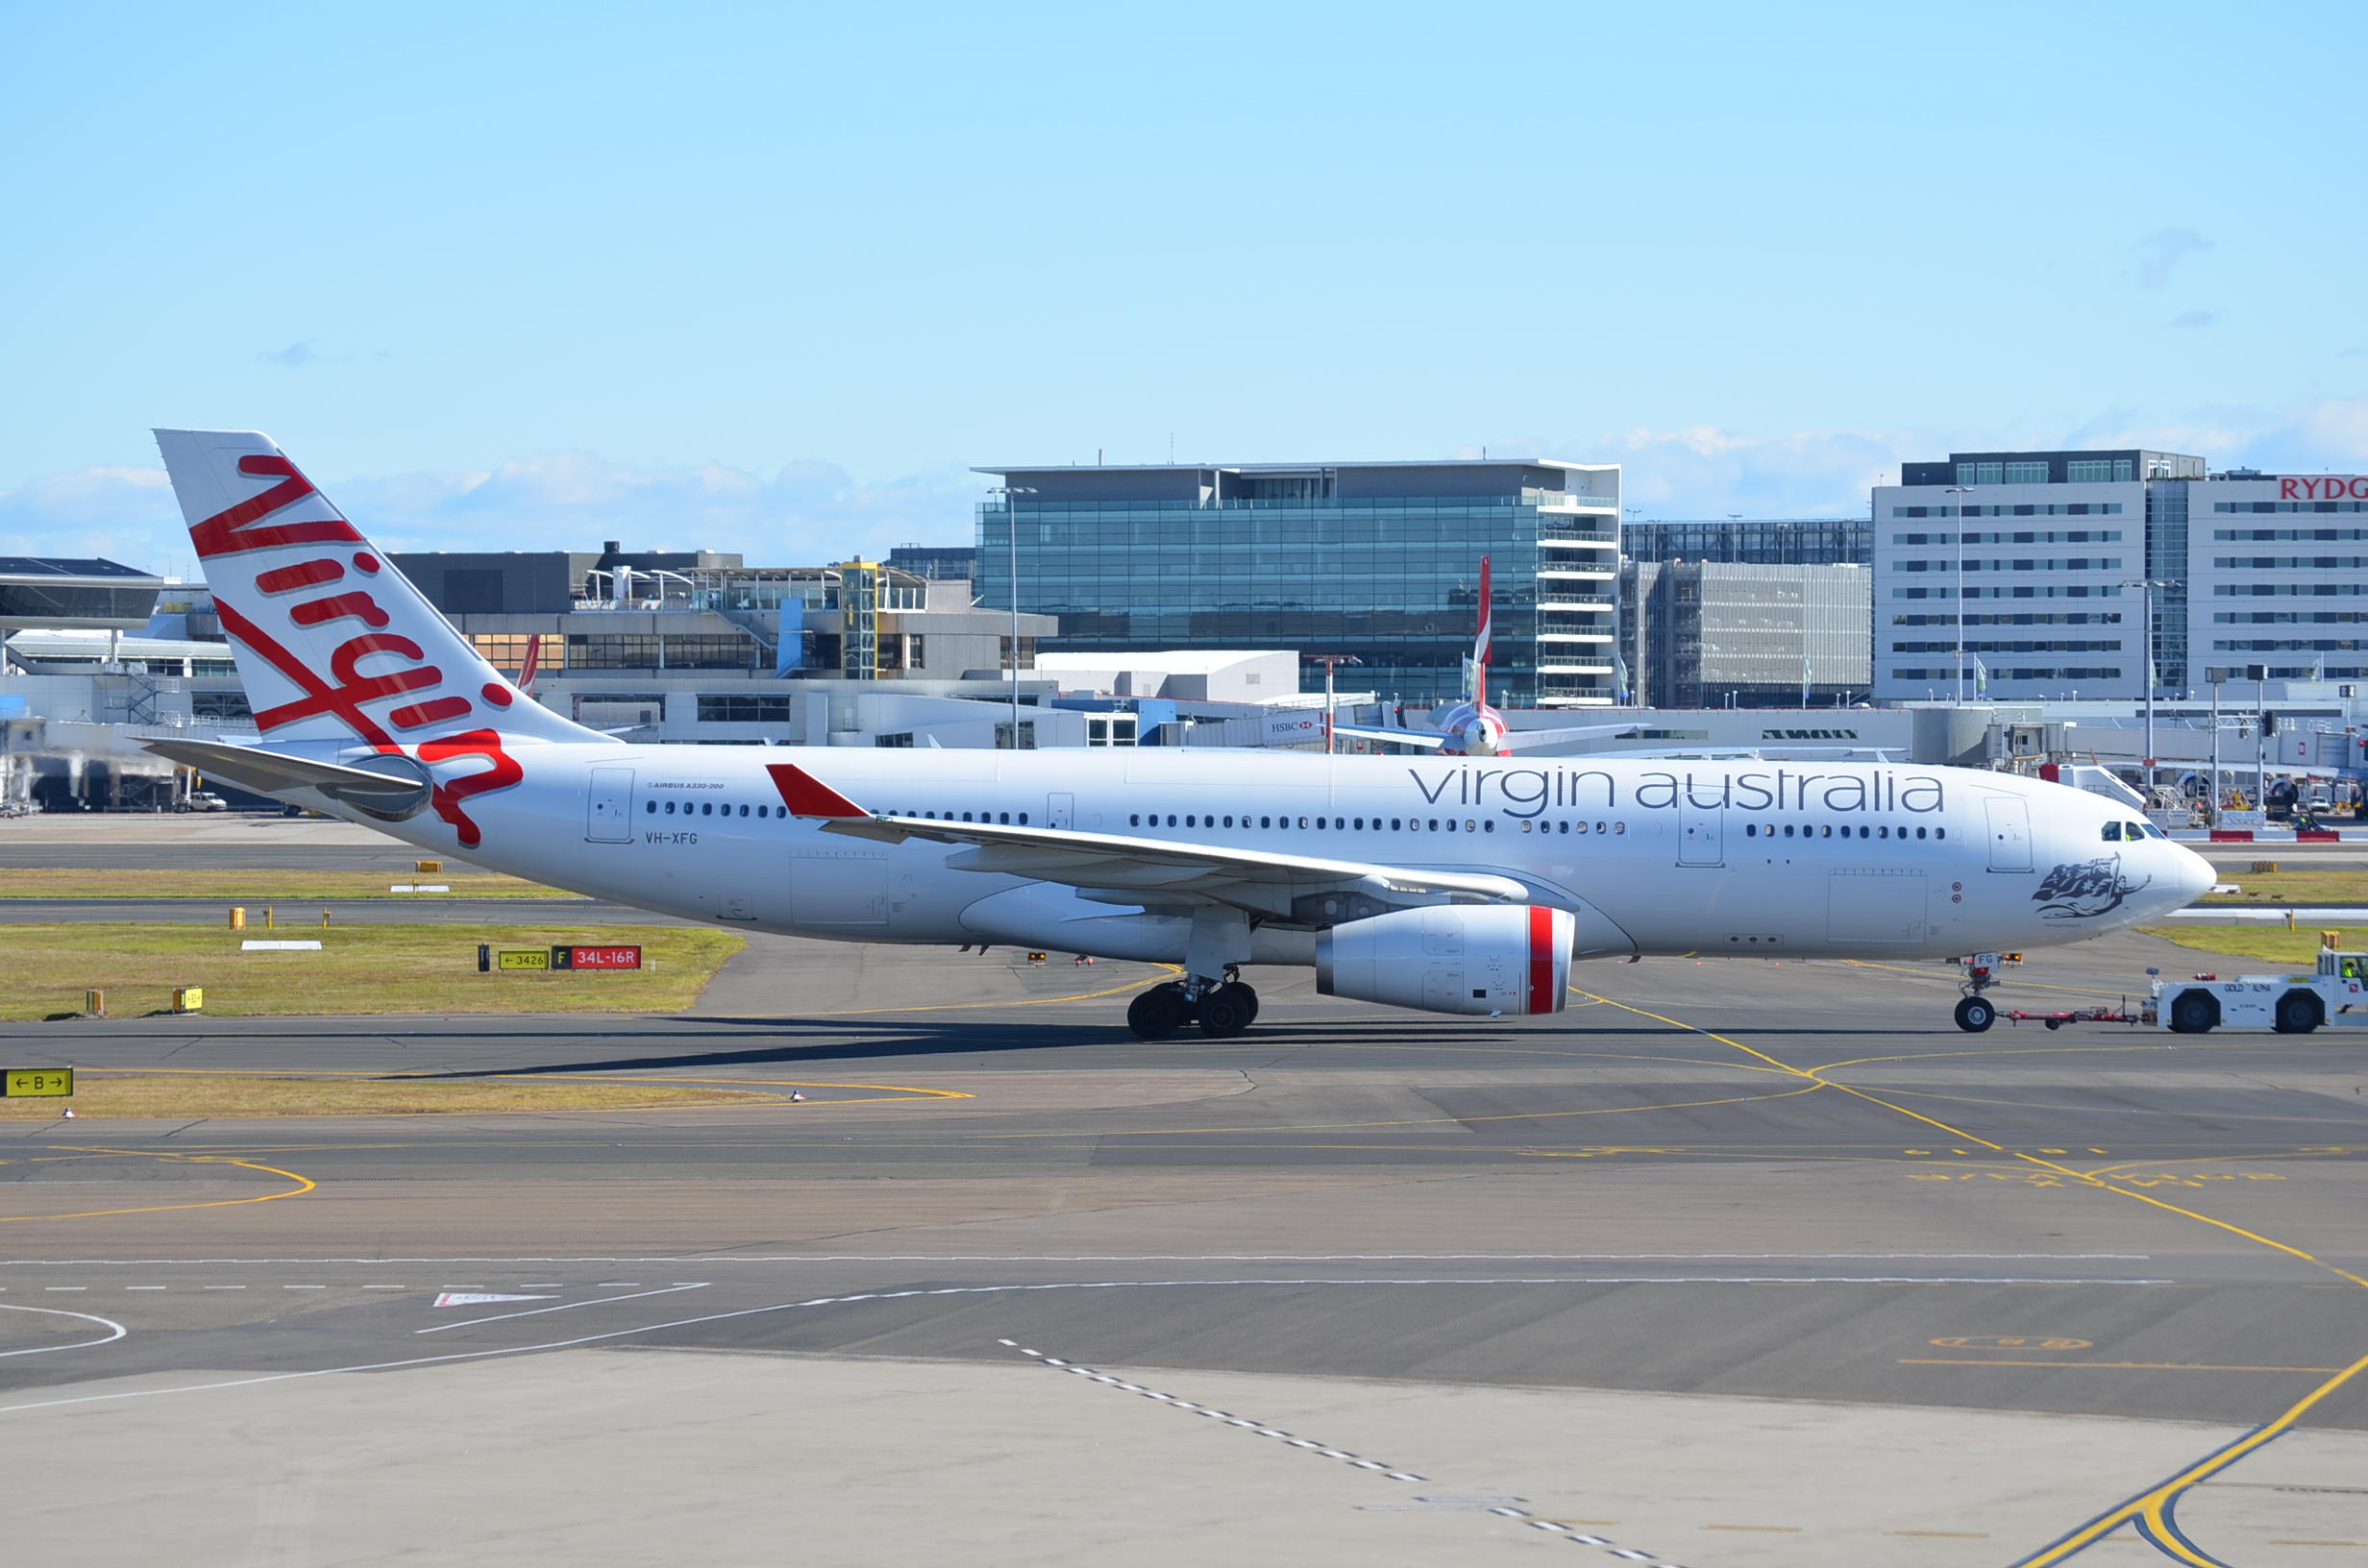 vehicles, airbus a330, airbus, aircraft, airplane, airport, sydney